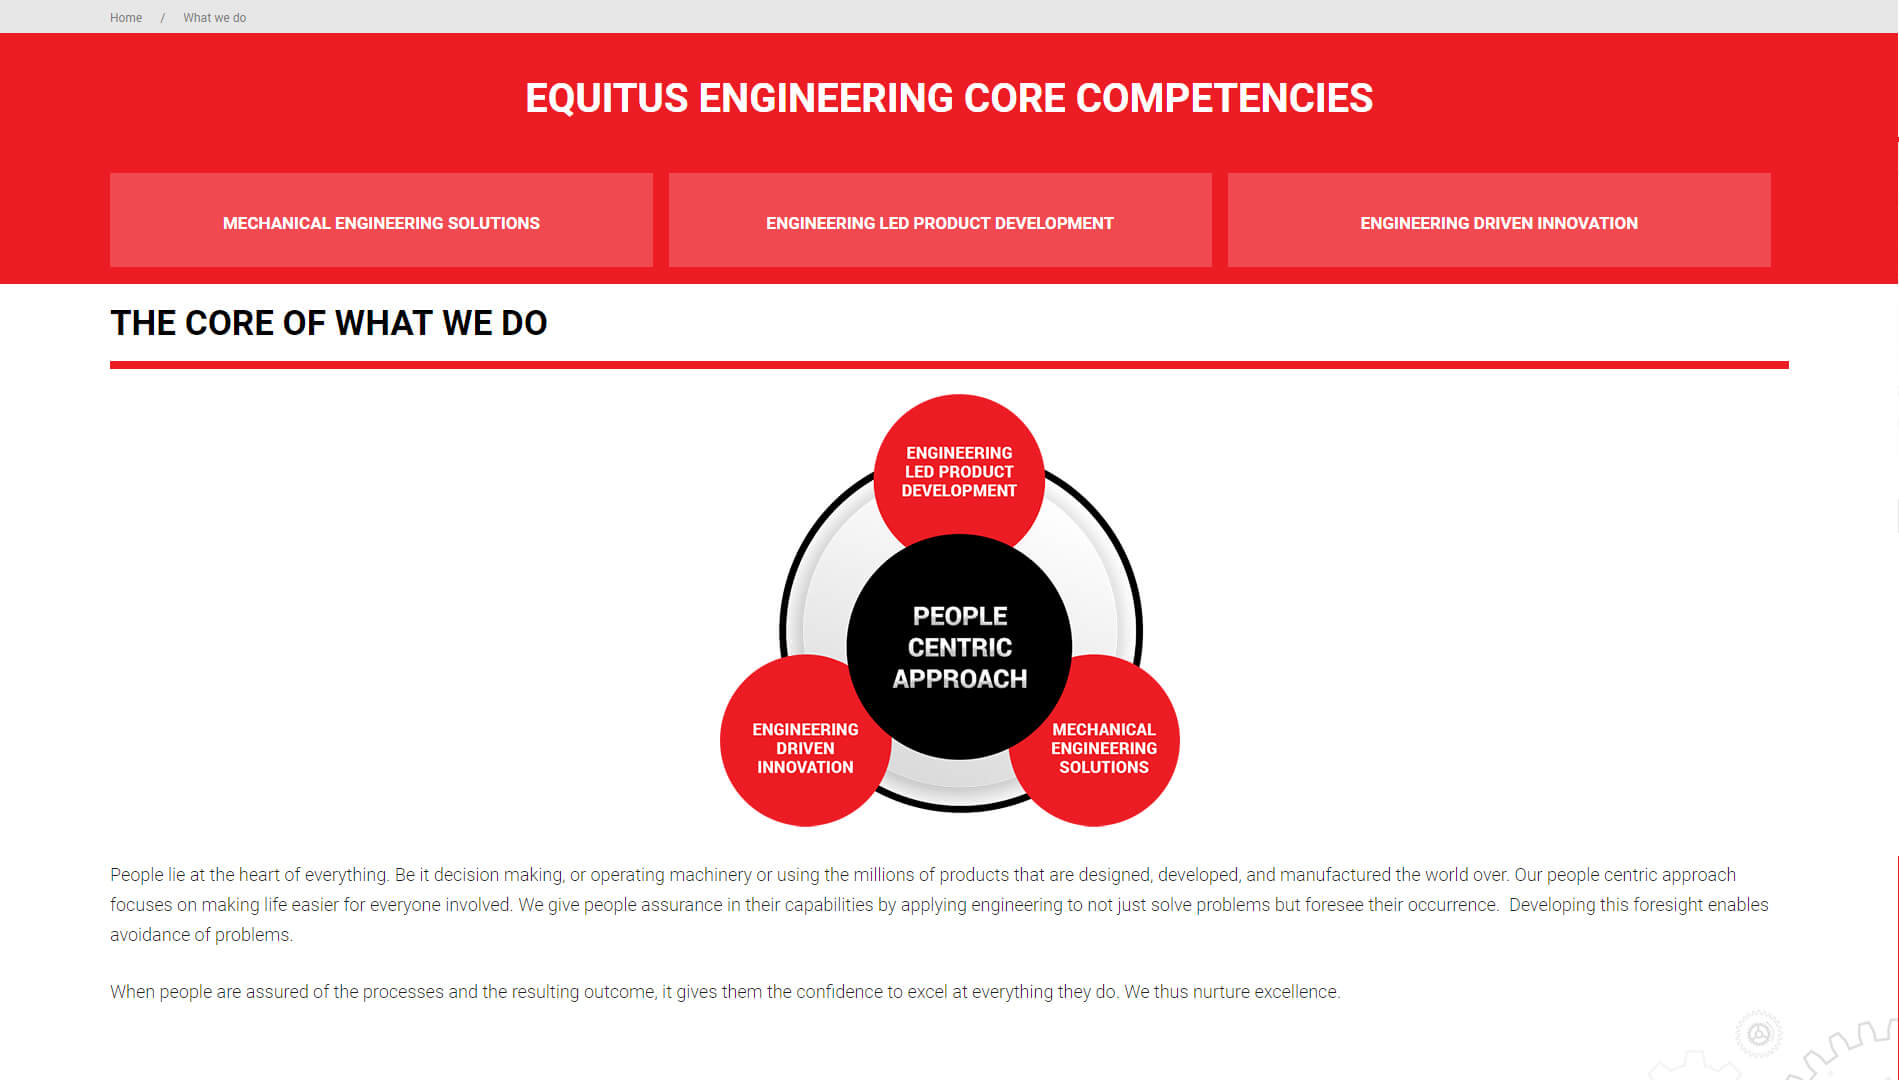 Equitus Engineering the core of what we do